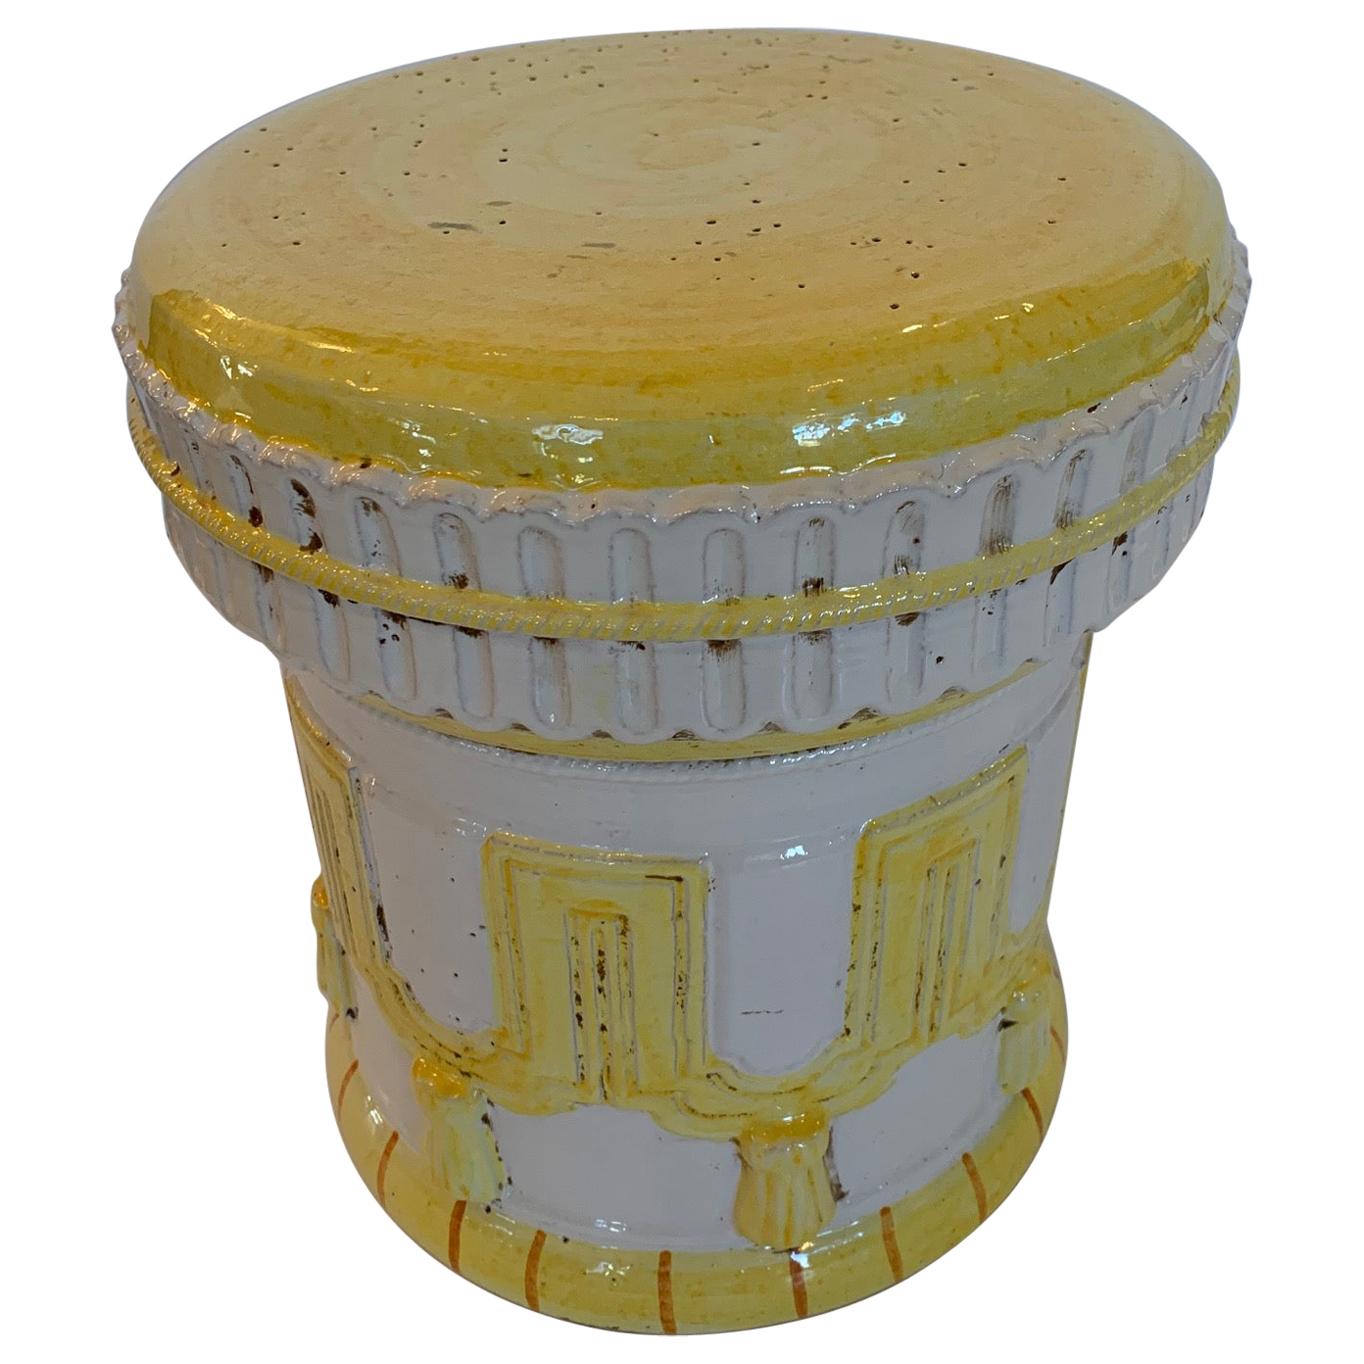 Cheery Yellow and White Italian Garden Seat Accent Table